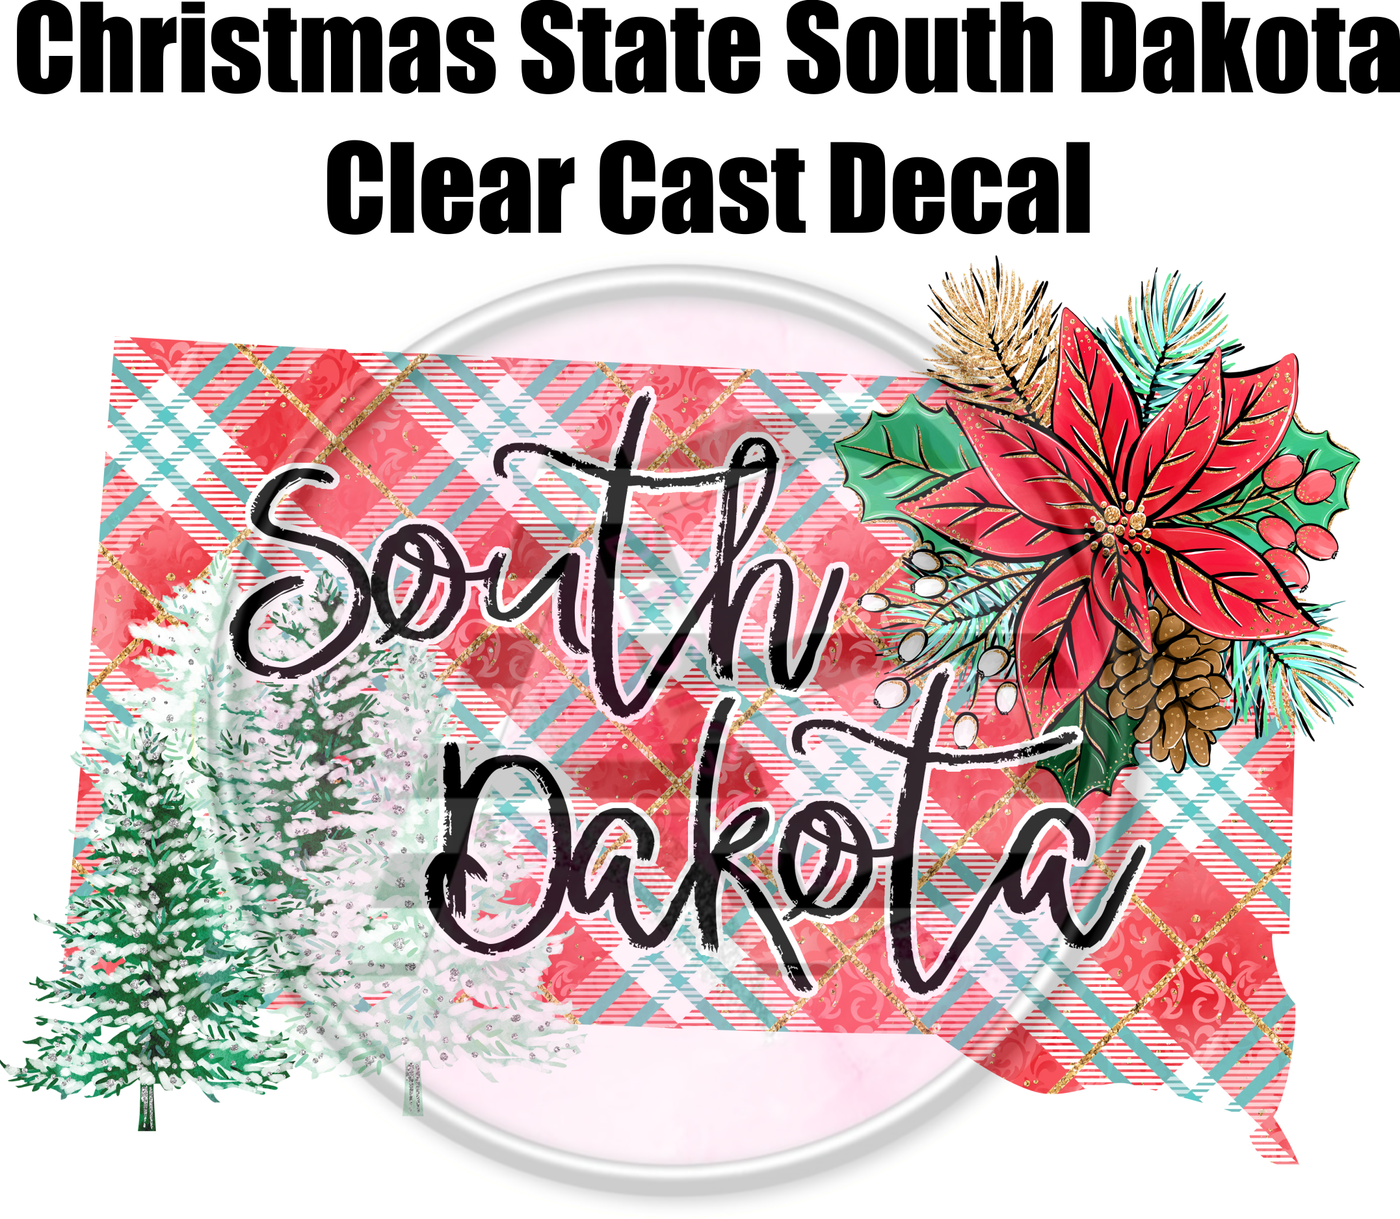 Christmas State South Dakota - Clear Cast Decal